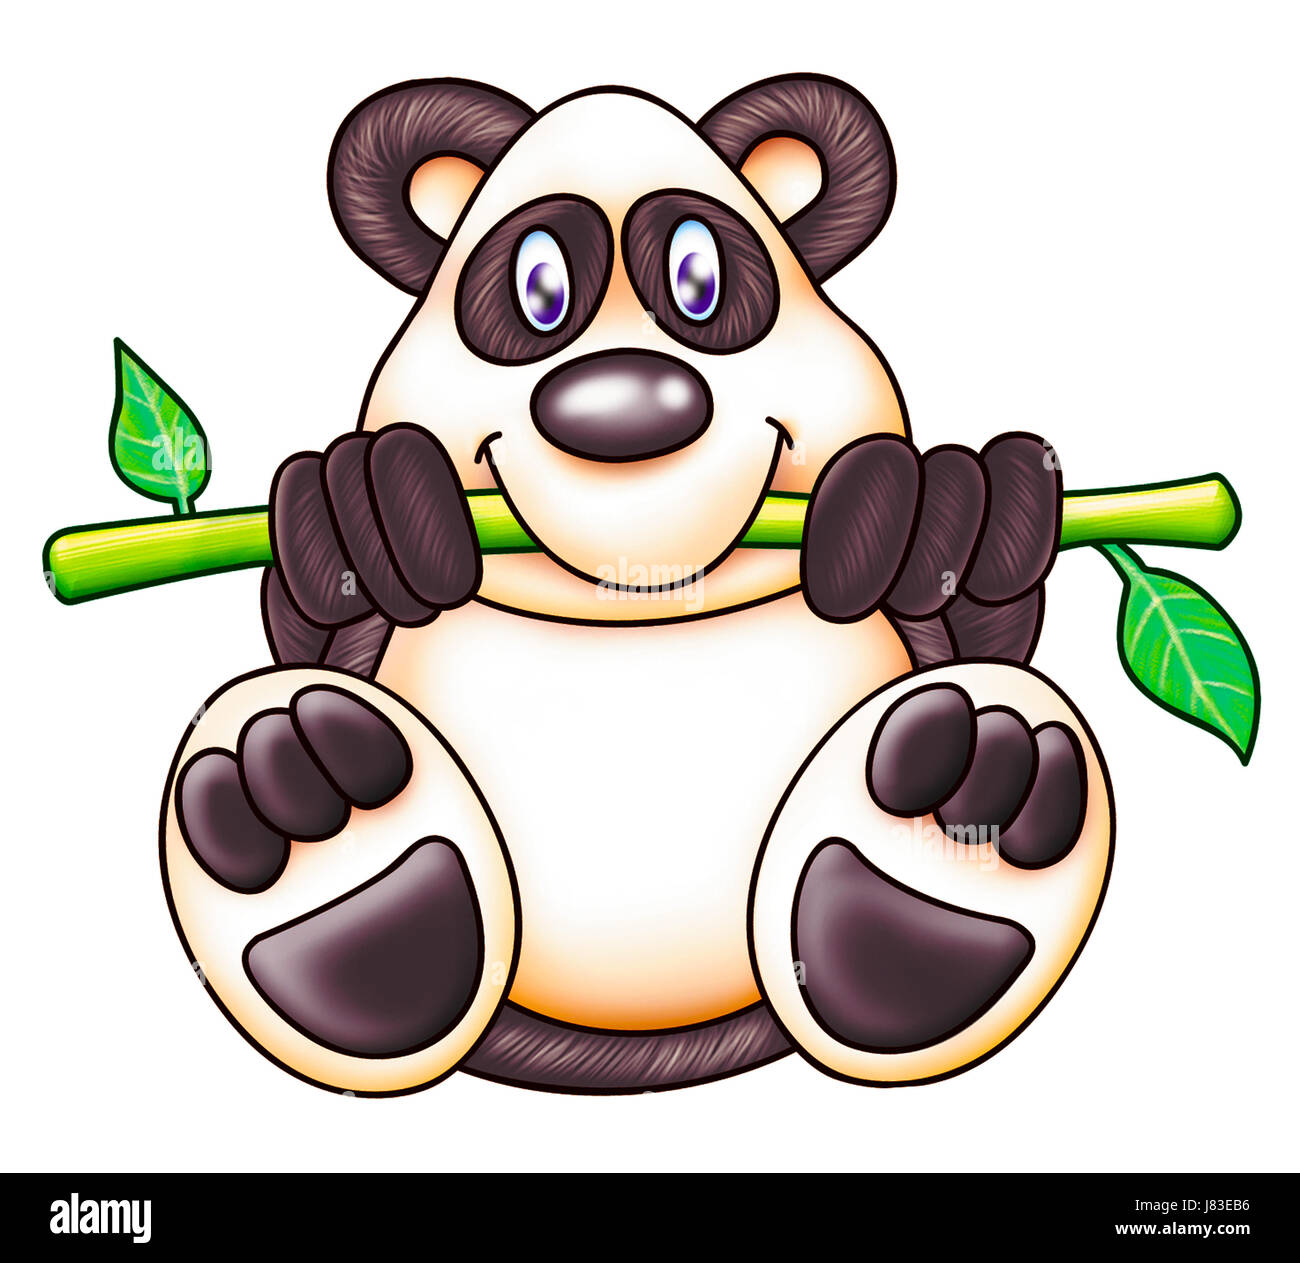 how to draw cute animated pandas